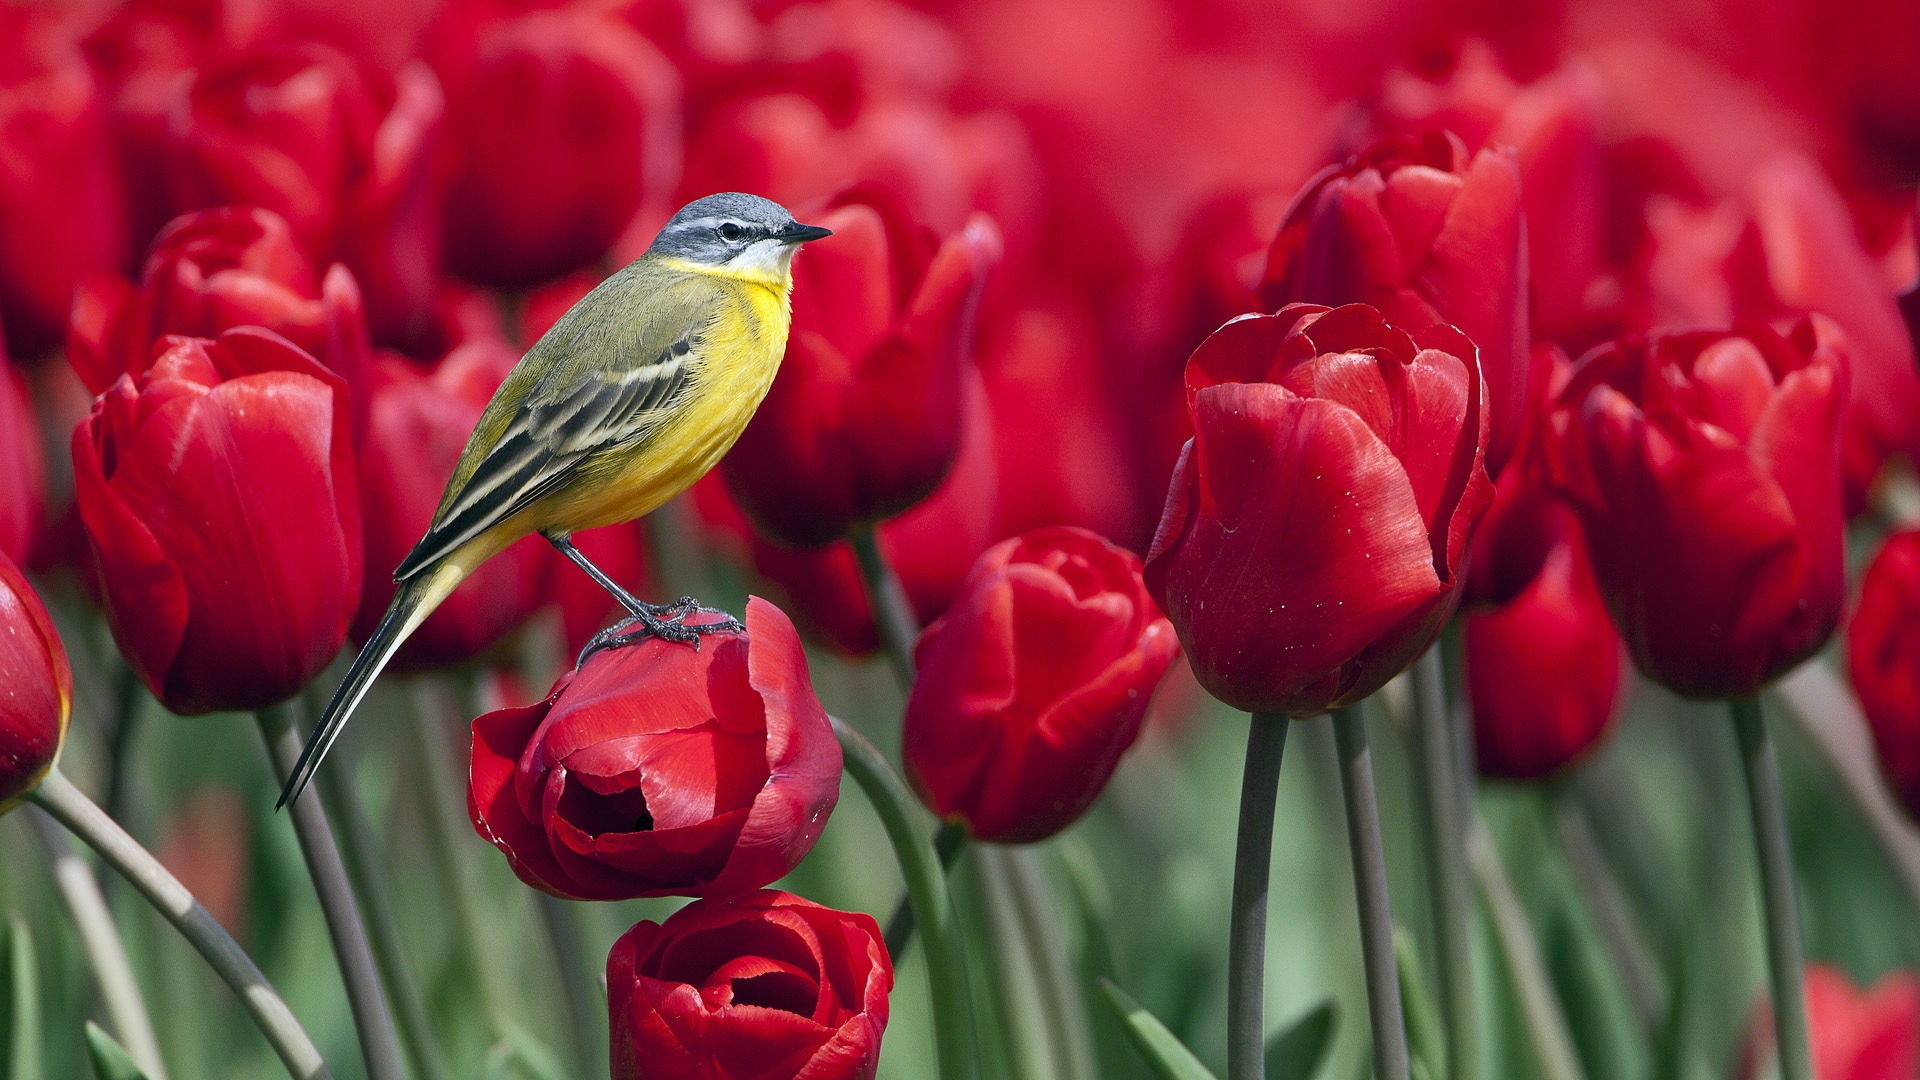 wallpaper of birds and flowers which is under the birds wallpapers 1920x1080